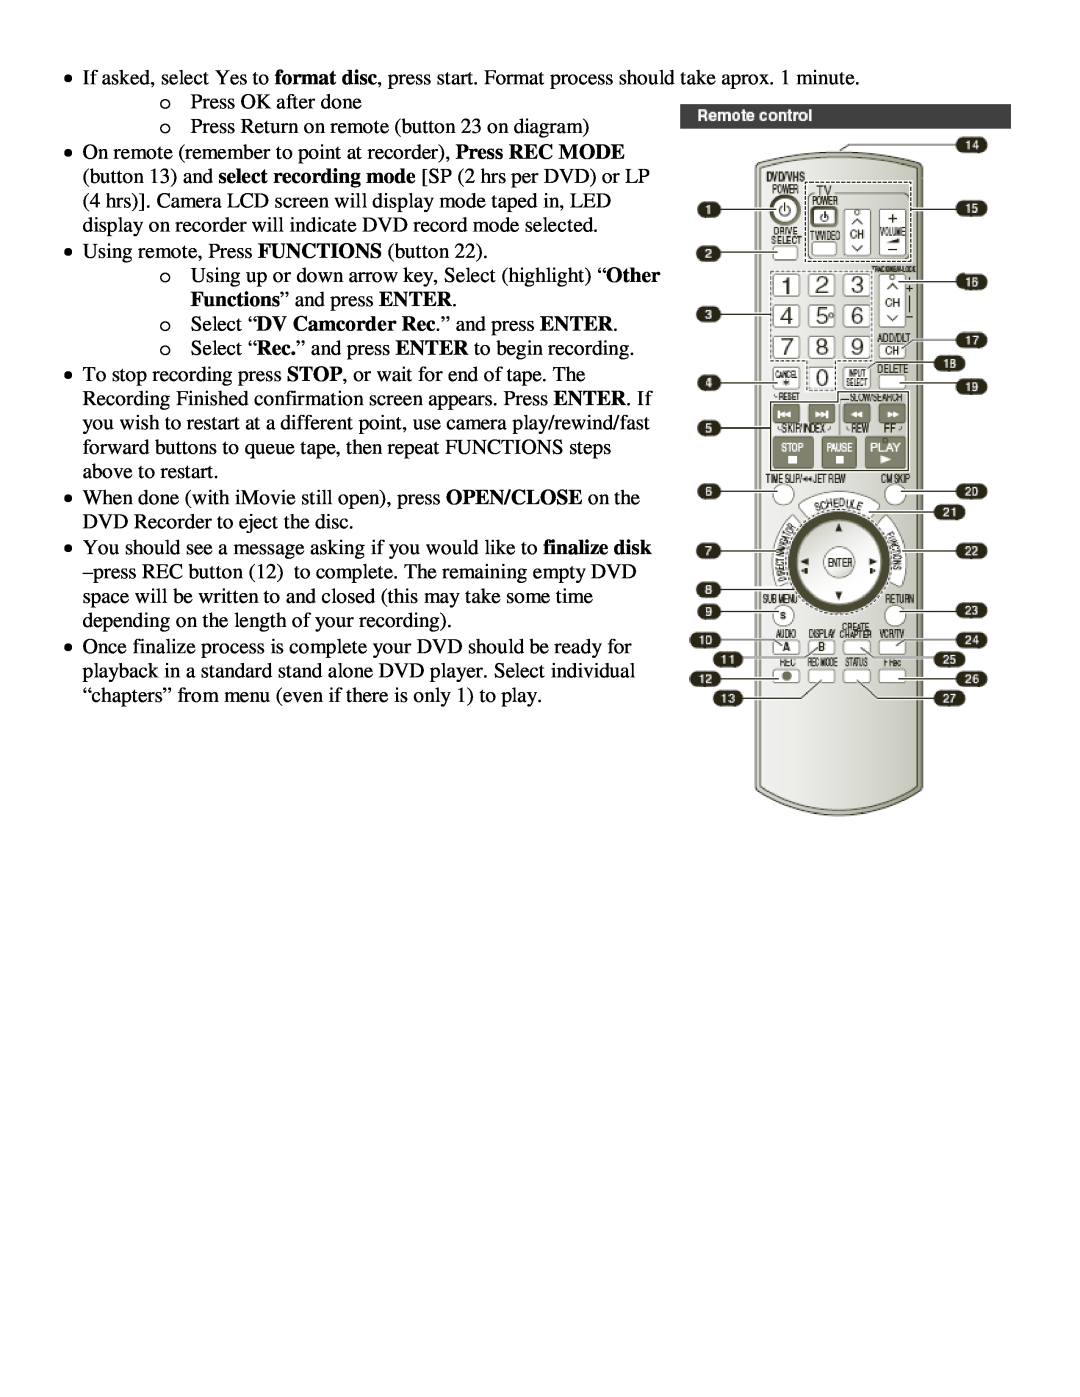 Sony DCR-HC21 manual o Press Return on remote button 23 on diagram, Using remote, Press FUNCTIONS button 